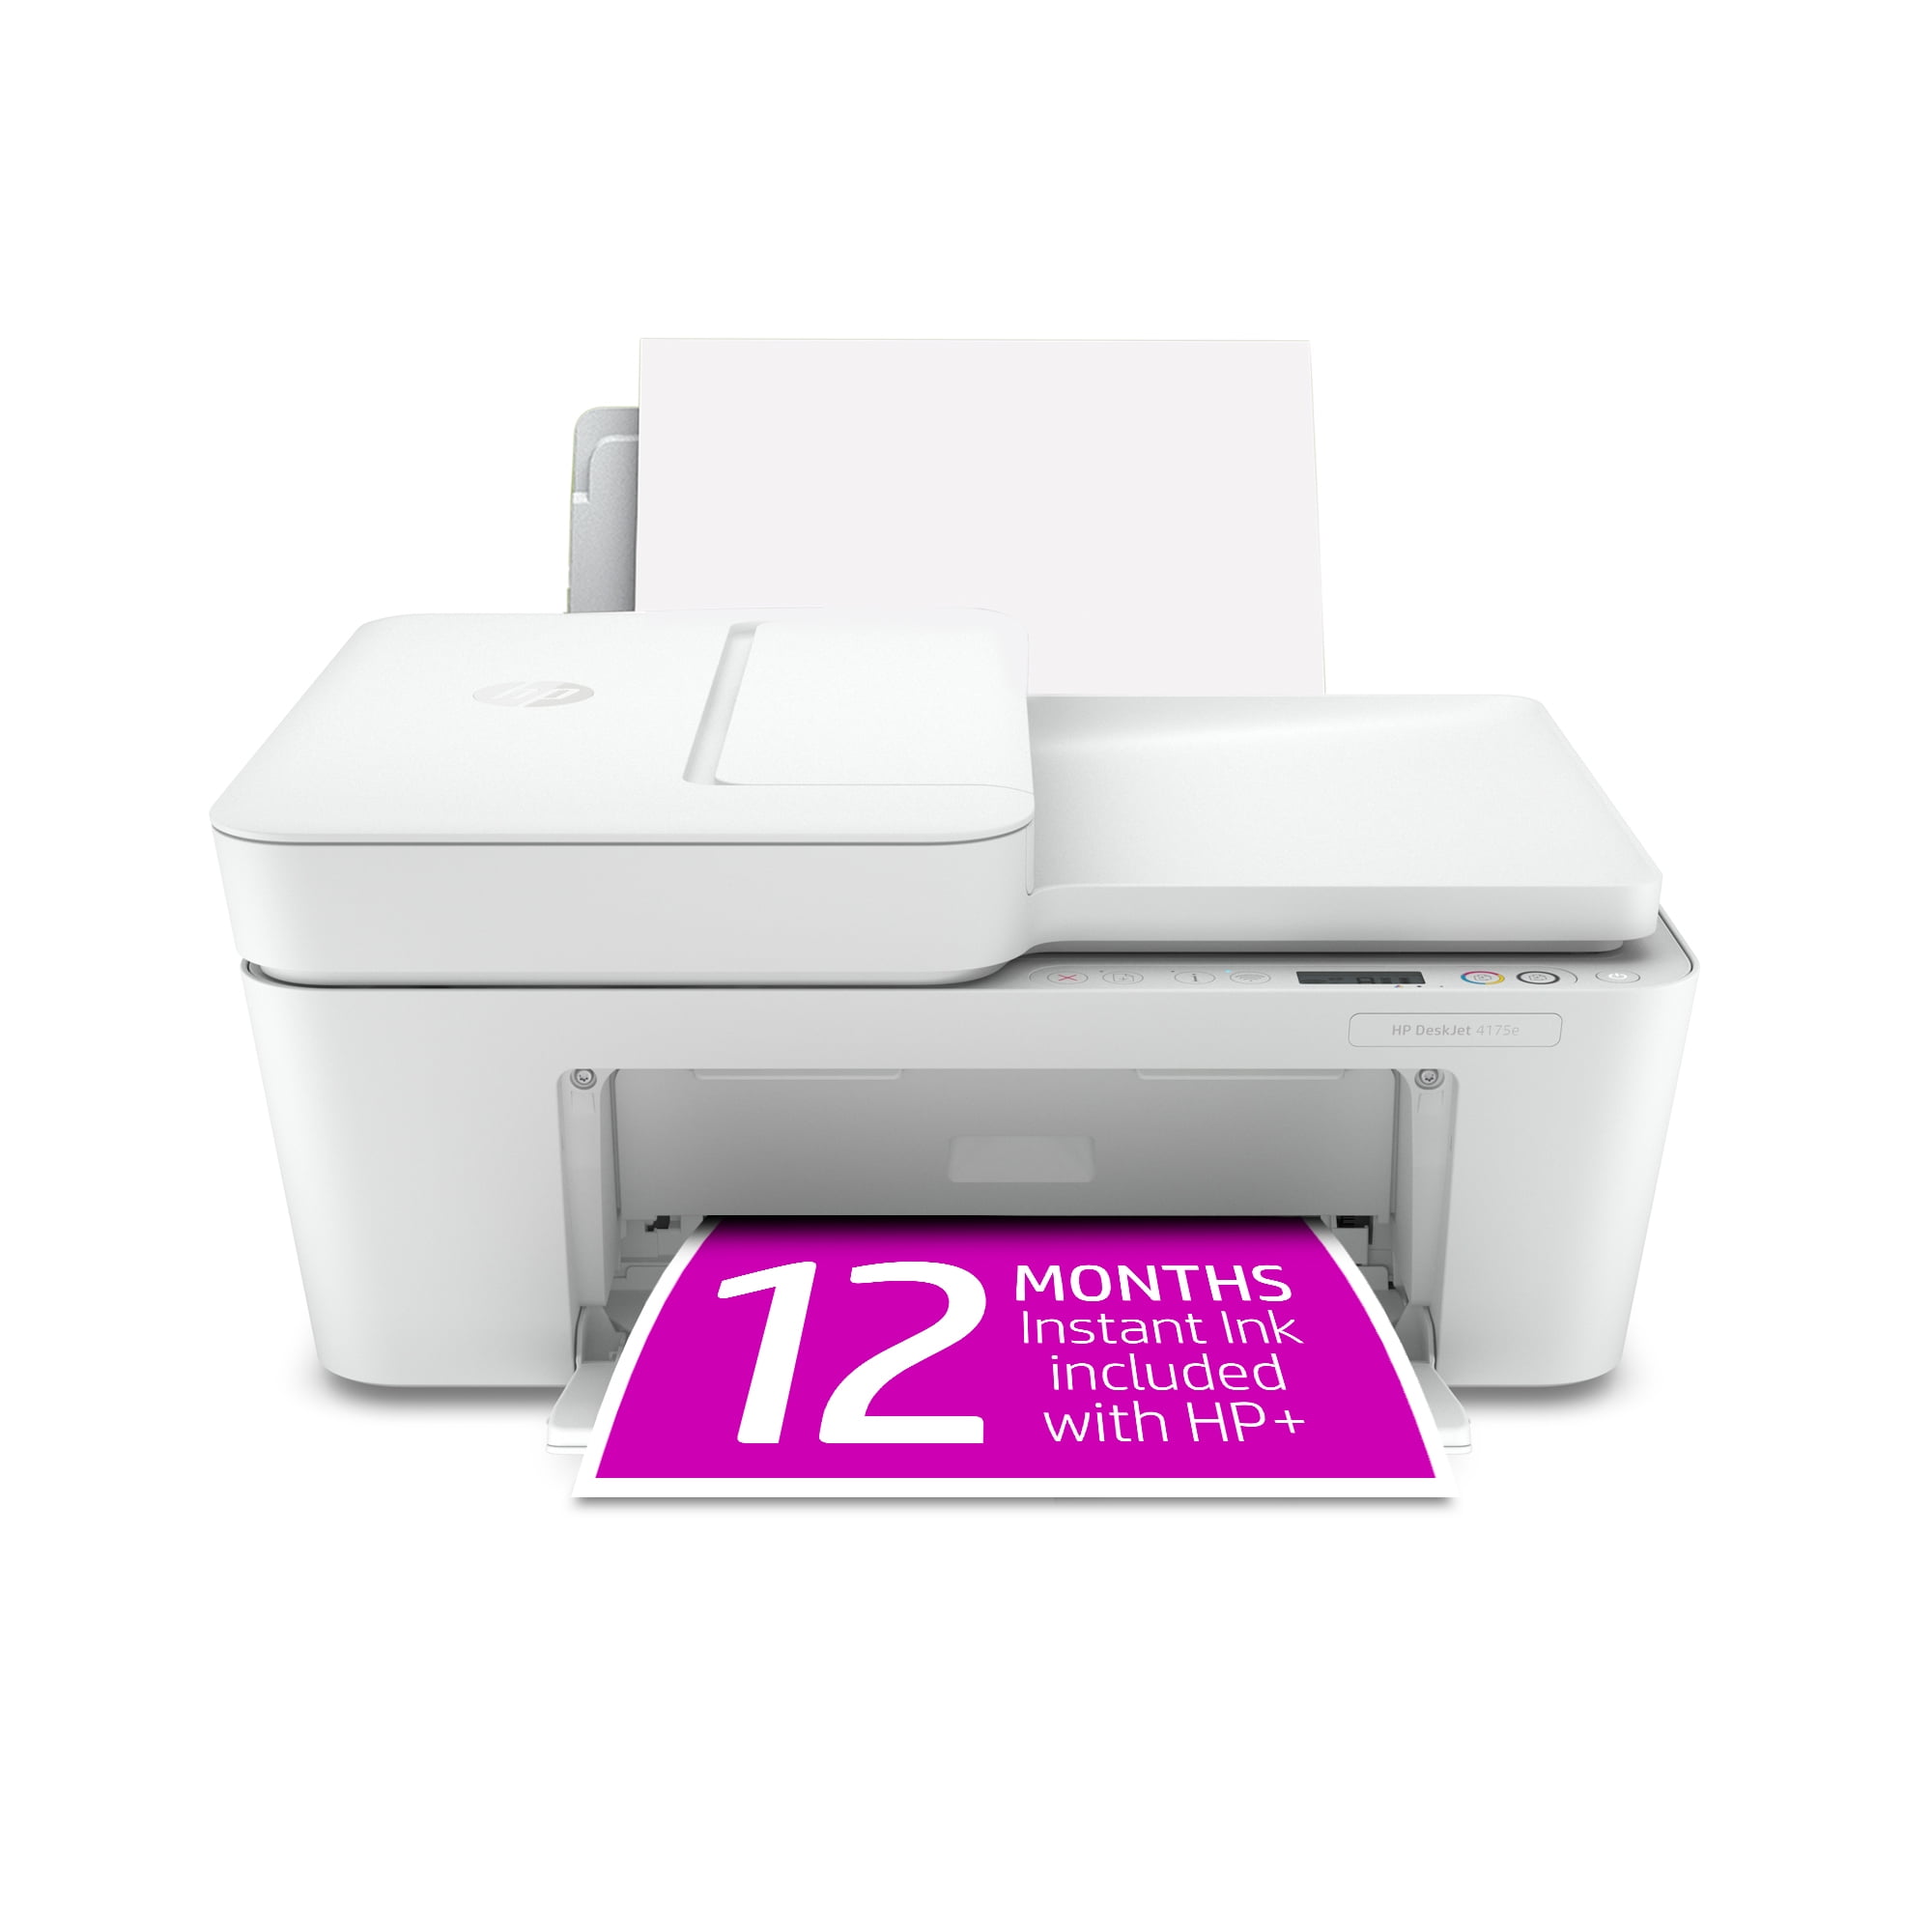 HP DeskJet 4175e All-in-One Wireless Color Inkjet Printer with 12 Months Instant Included with HP+ - Walmart.com